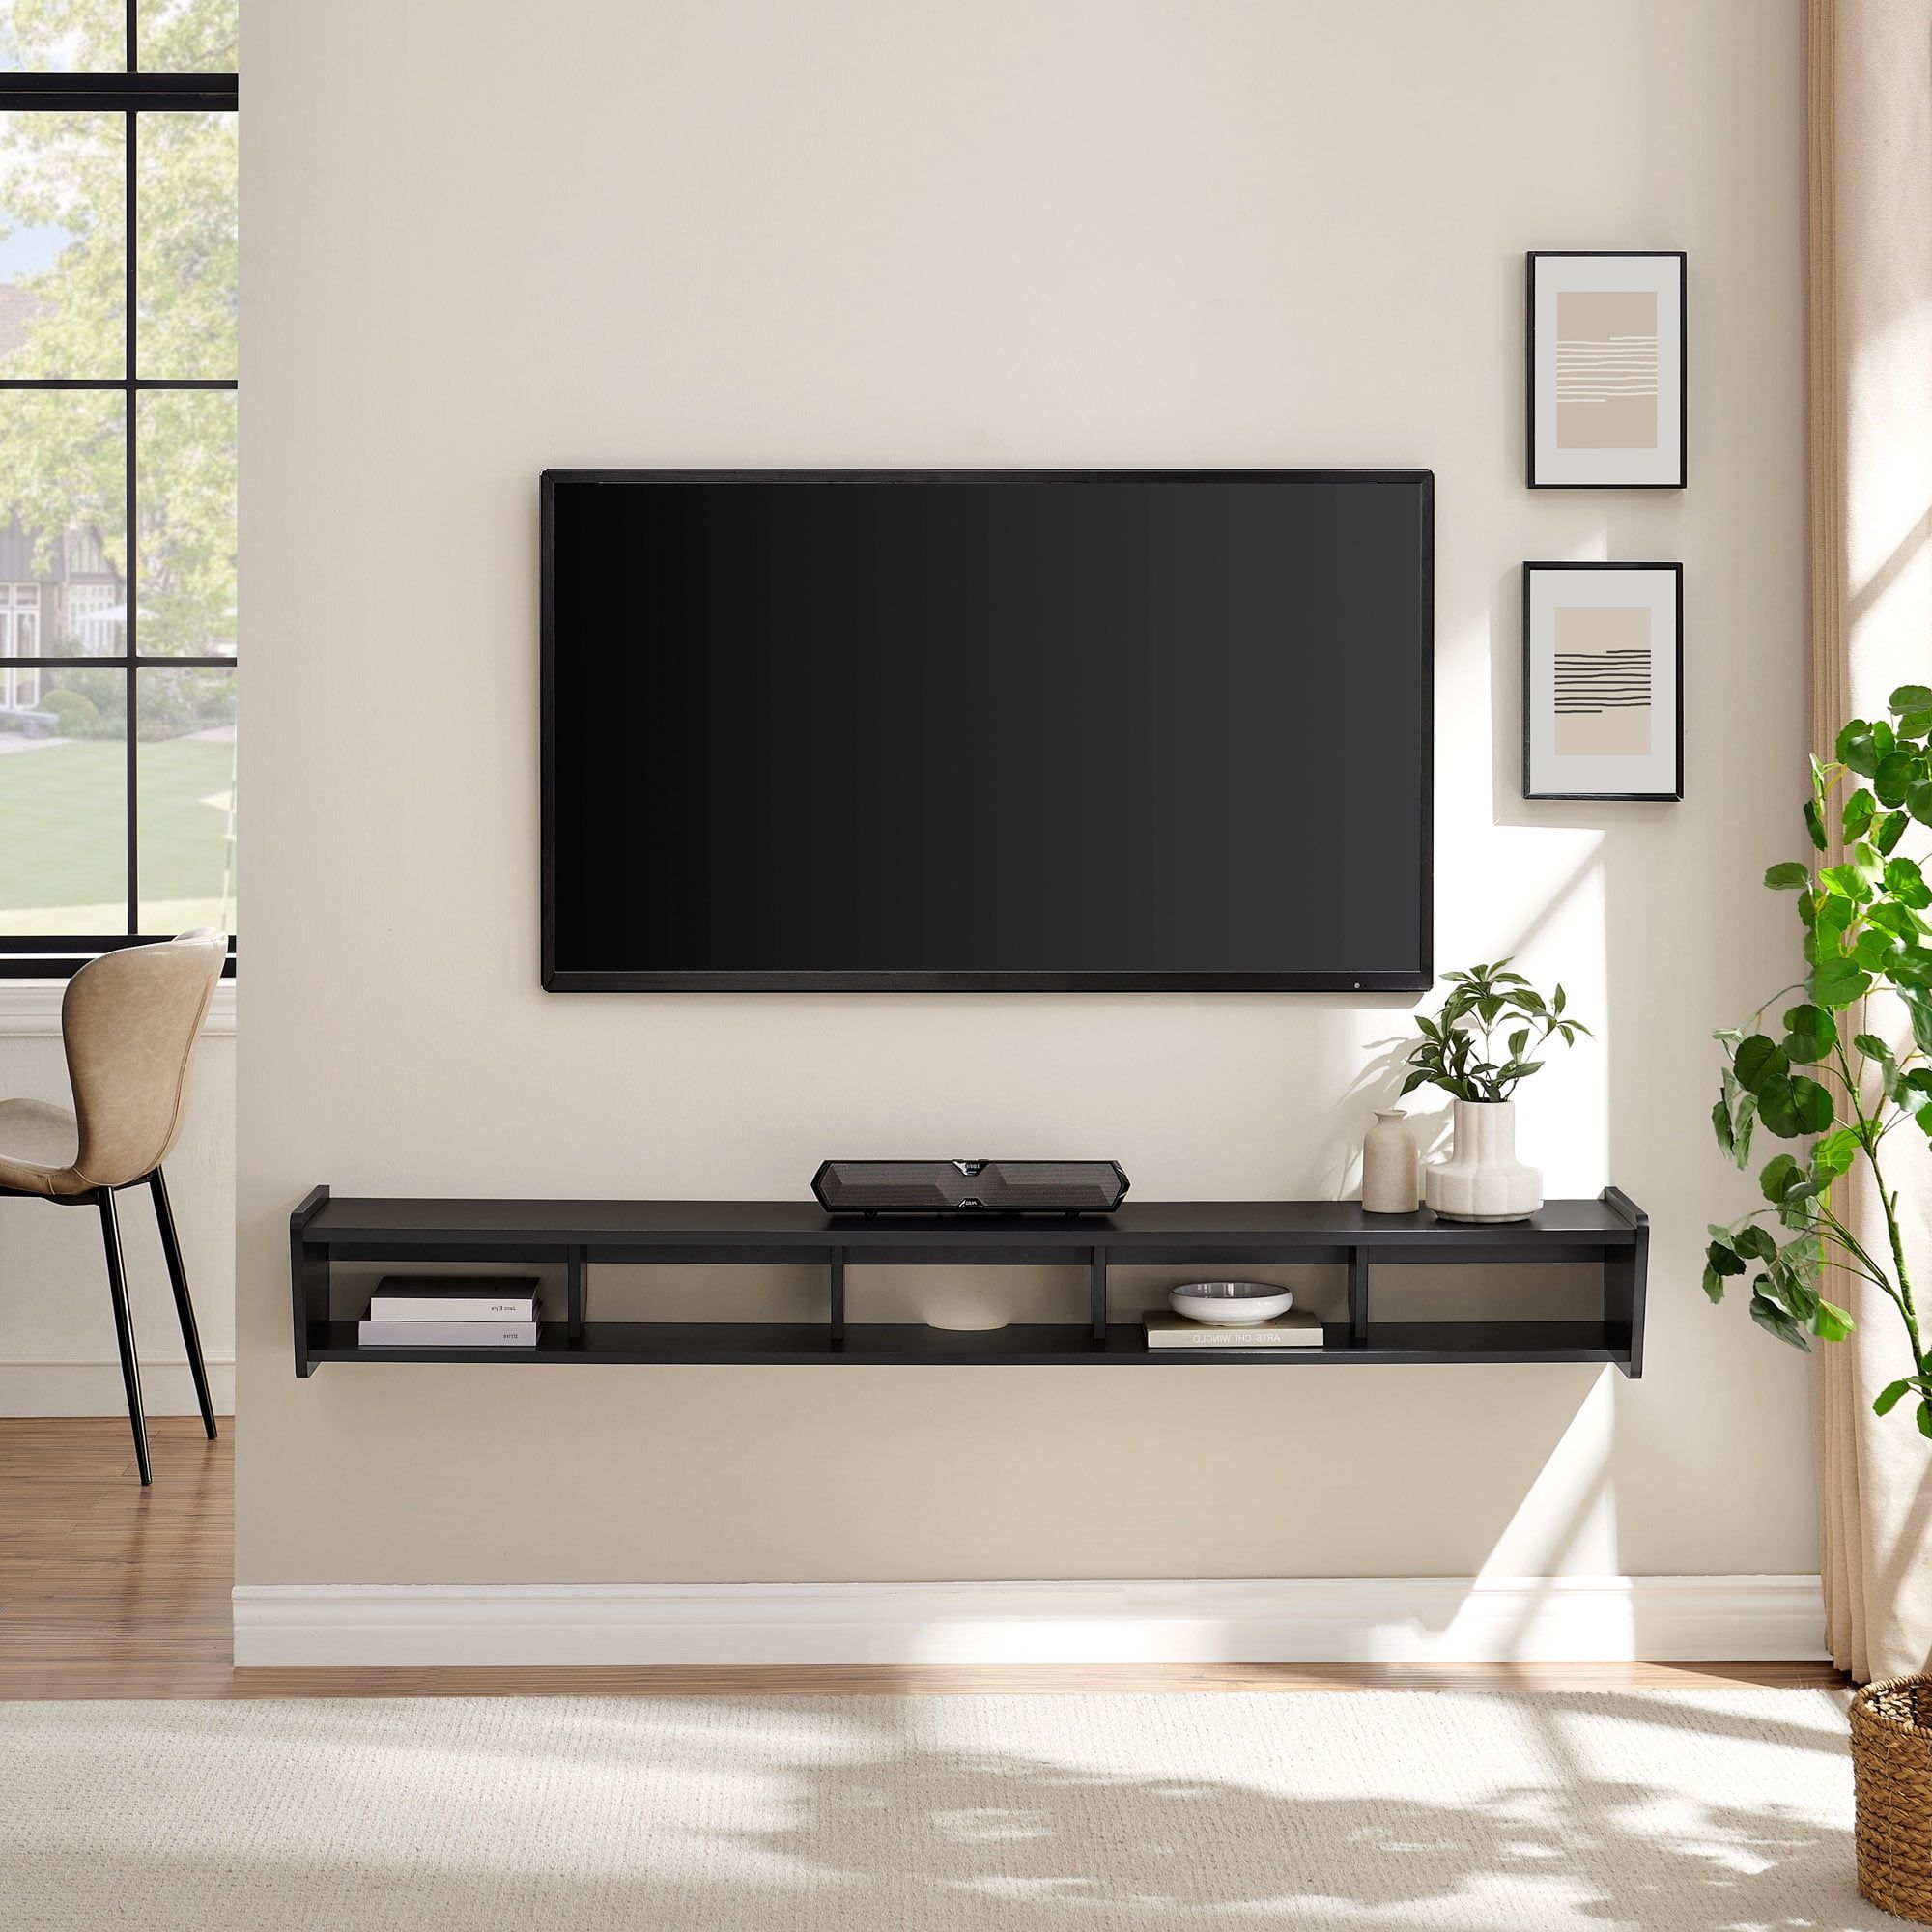 Manor Park Minimalist Floating Tv Stand For Tvs Up To 70”, Solid Black –  Walmart In Floating Stands For Tvs (Gallery 17 of 20)